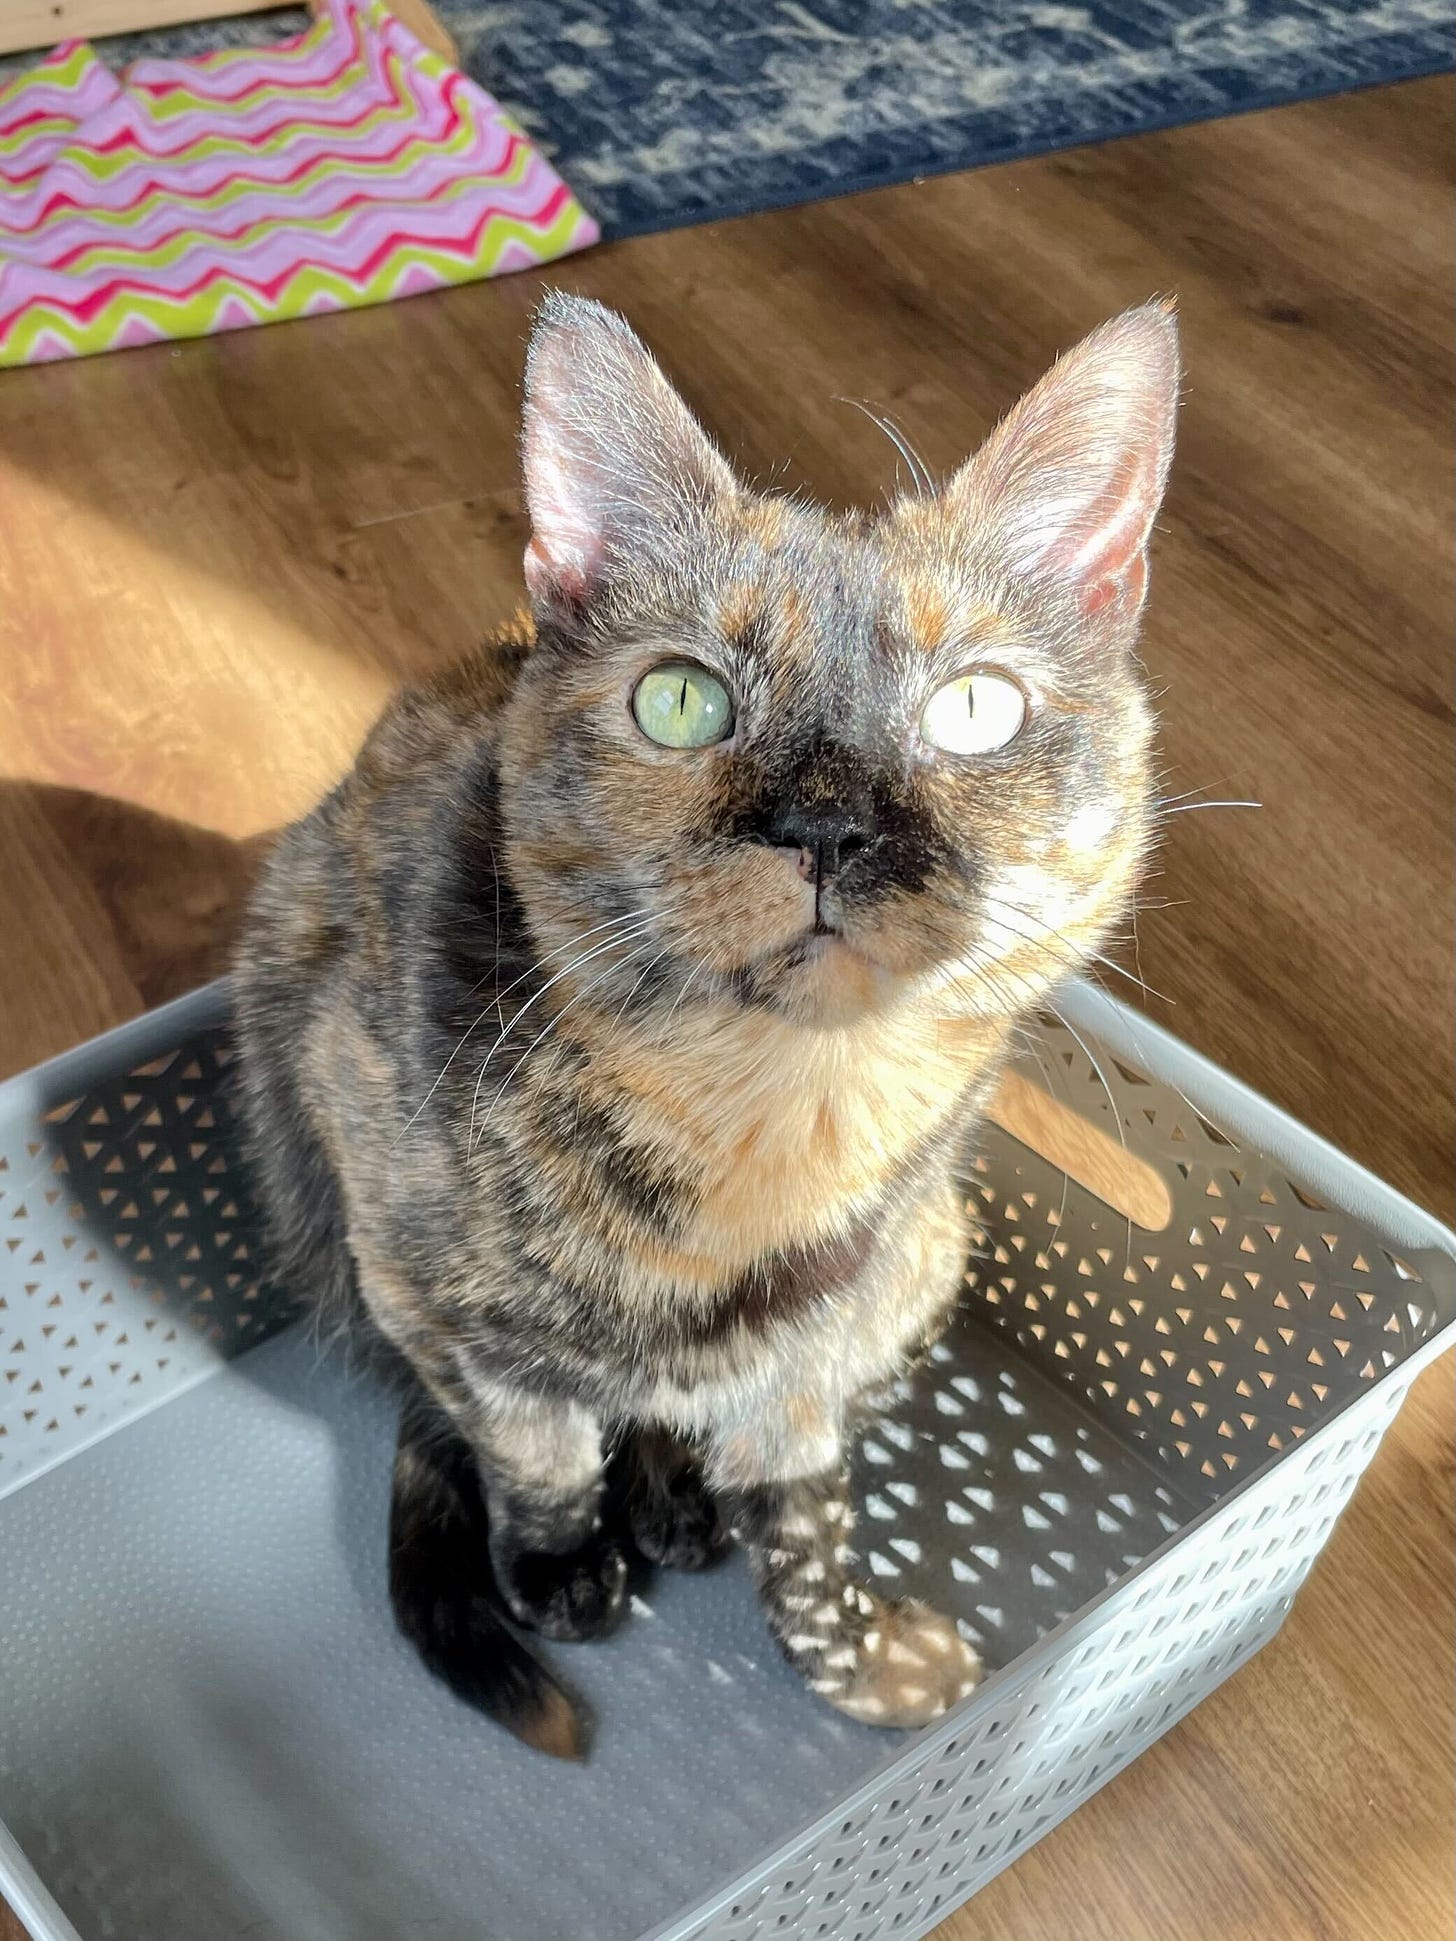 A different tortie cat, also staring at the camera with big round eyes